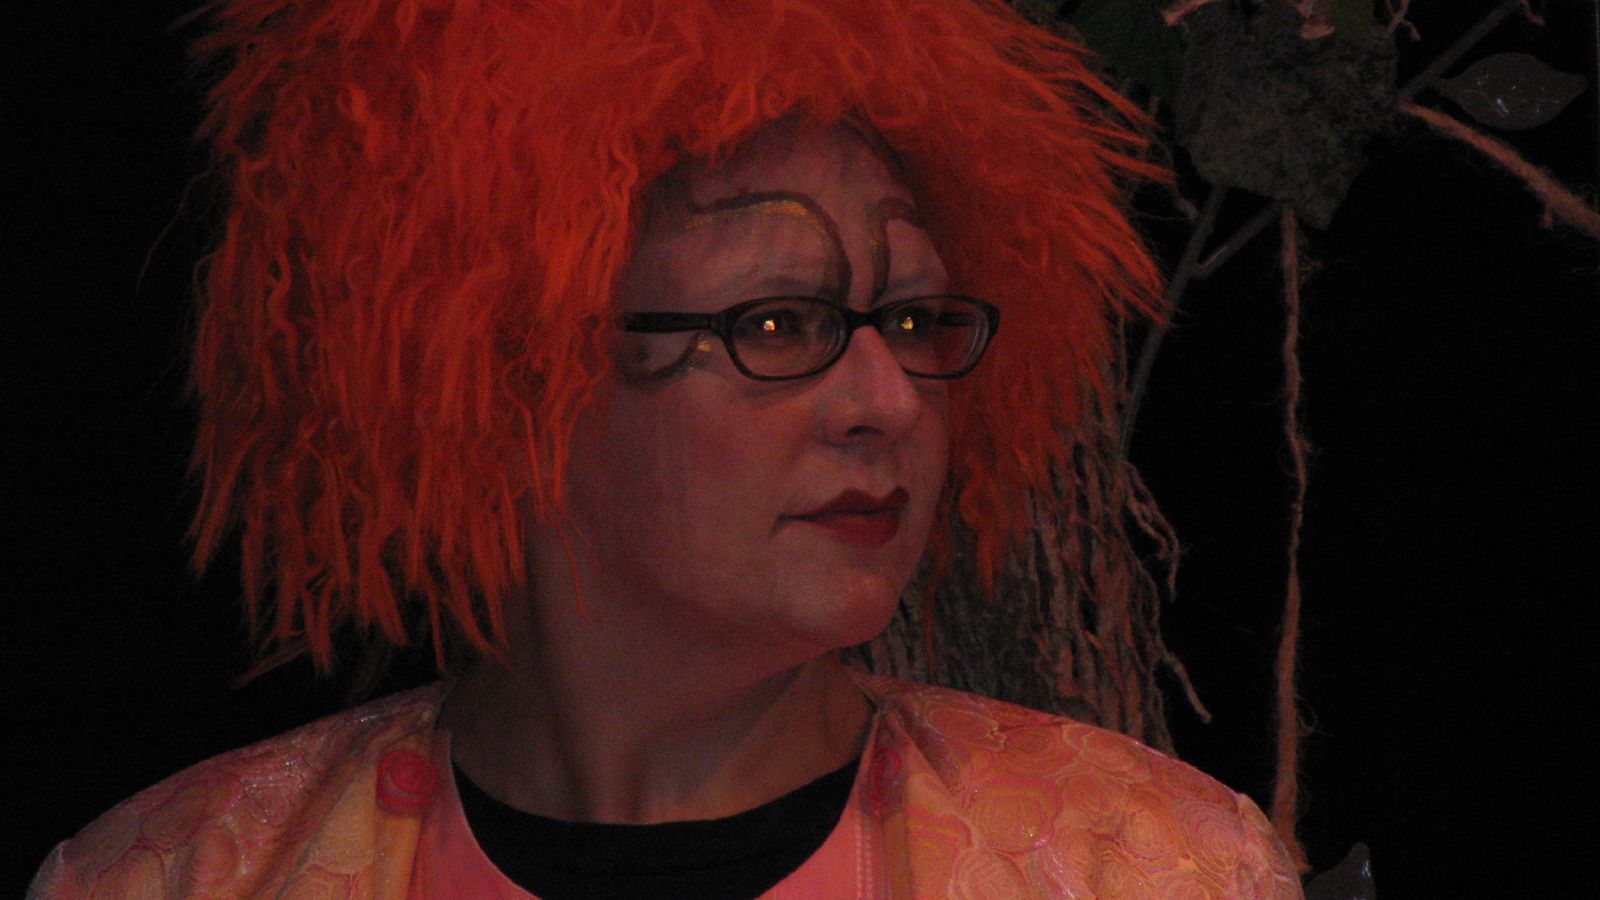 a woman with bright red hair and glasses stares ahead